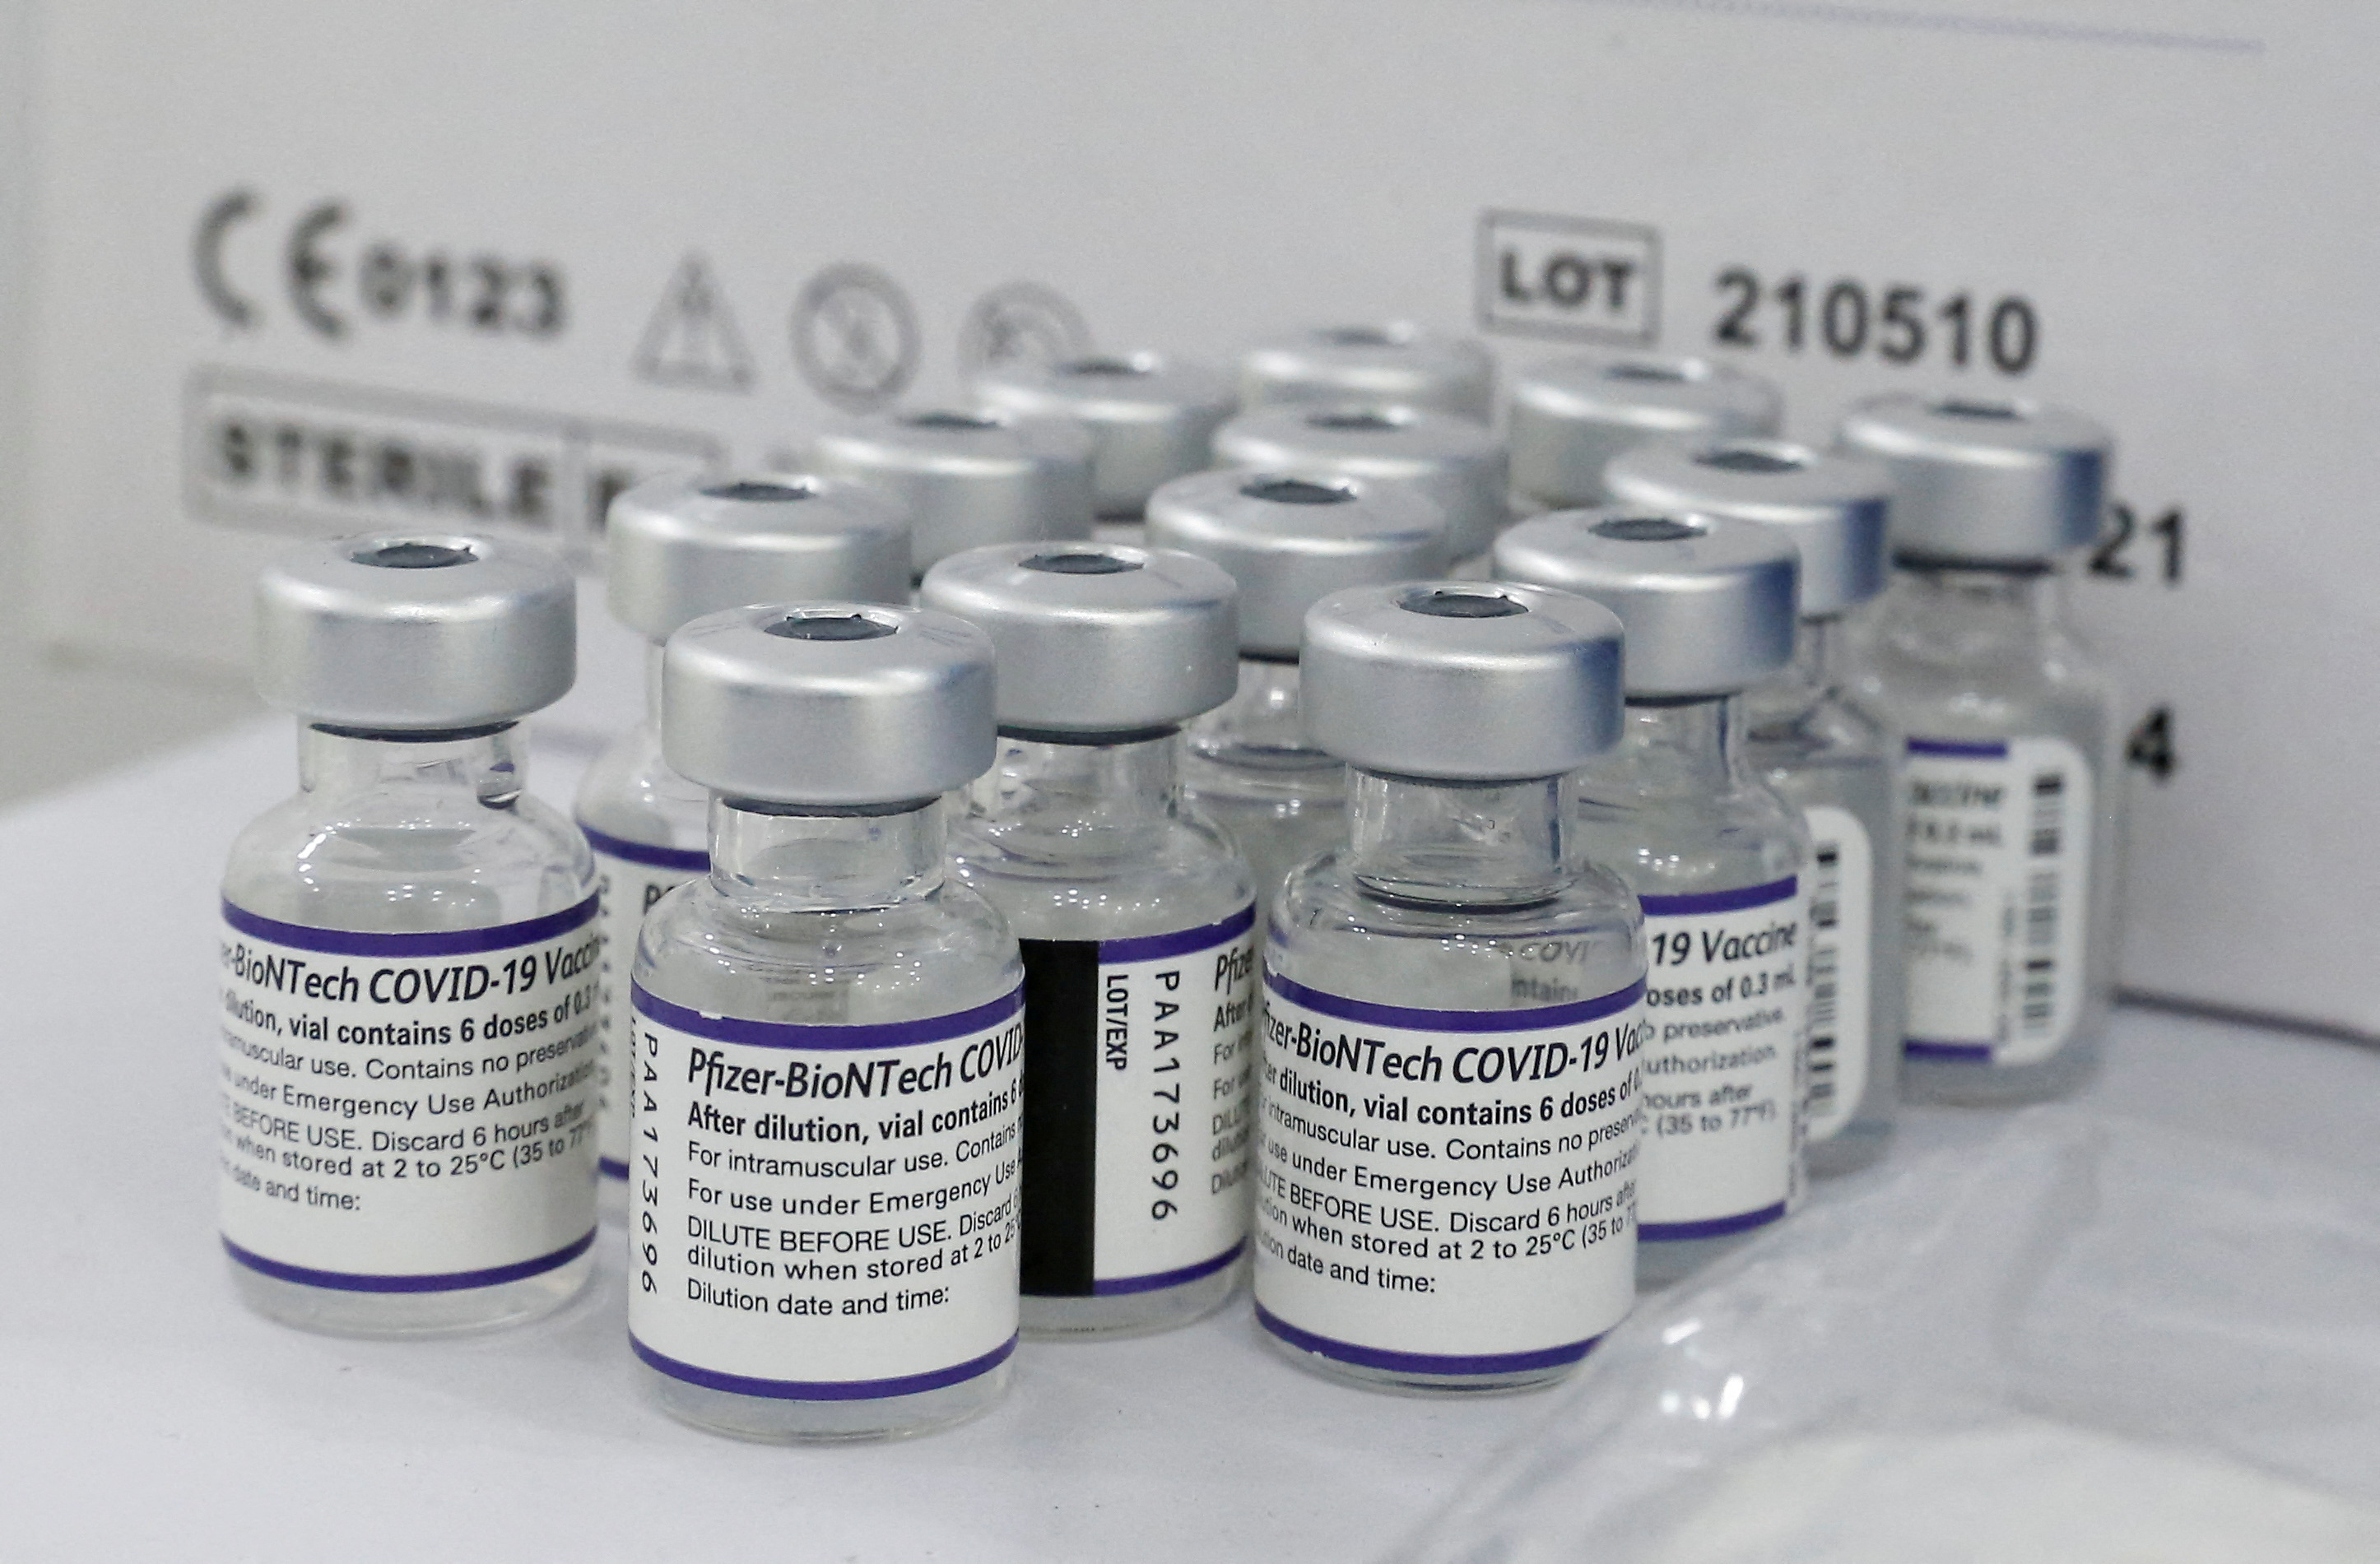 Vials containing the Pfizer/BioNtech vaccine against COVID-19 are displayed at a mobile vaccine clinic, in Valparaiso